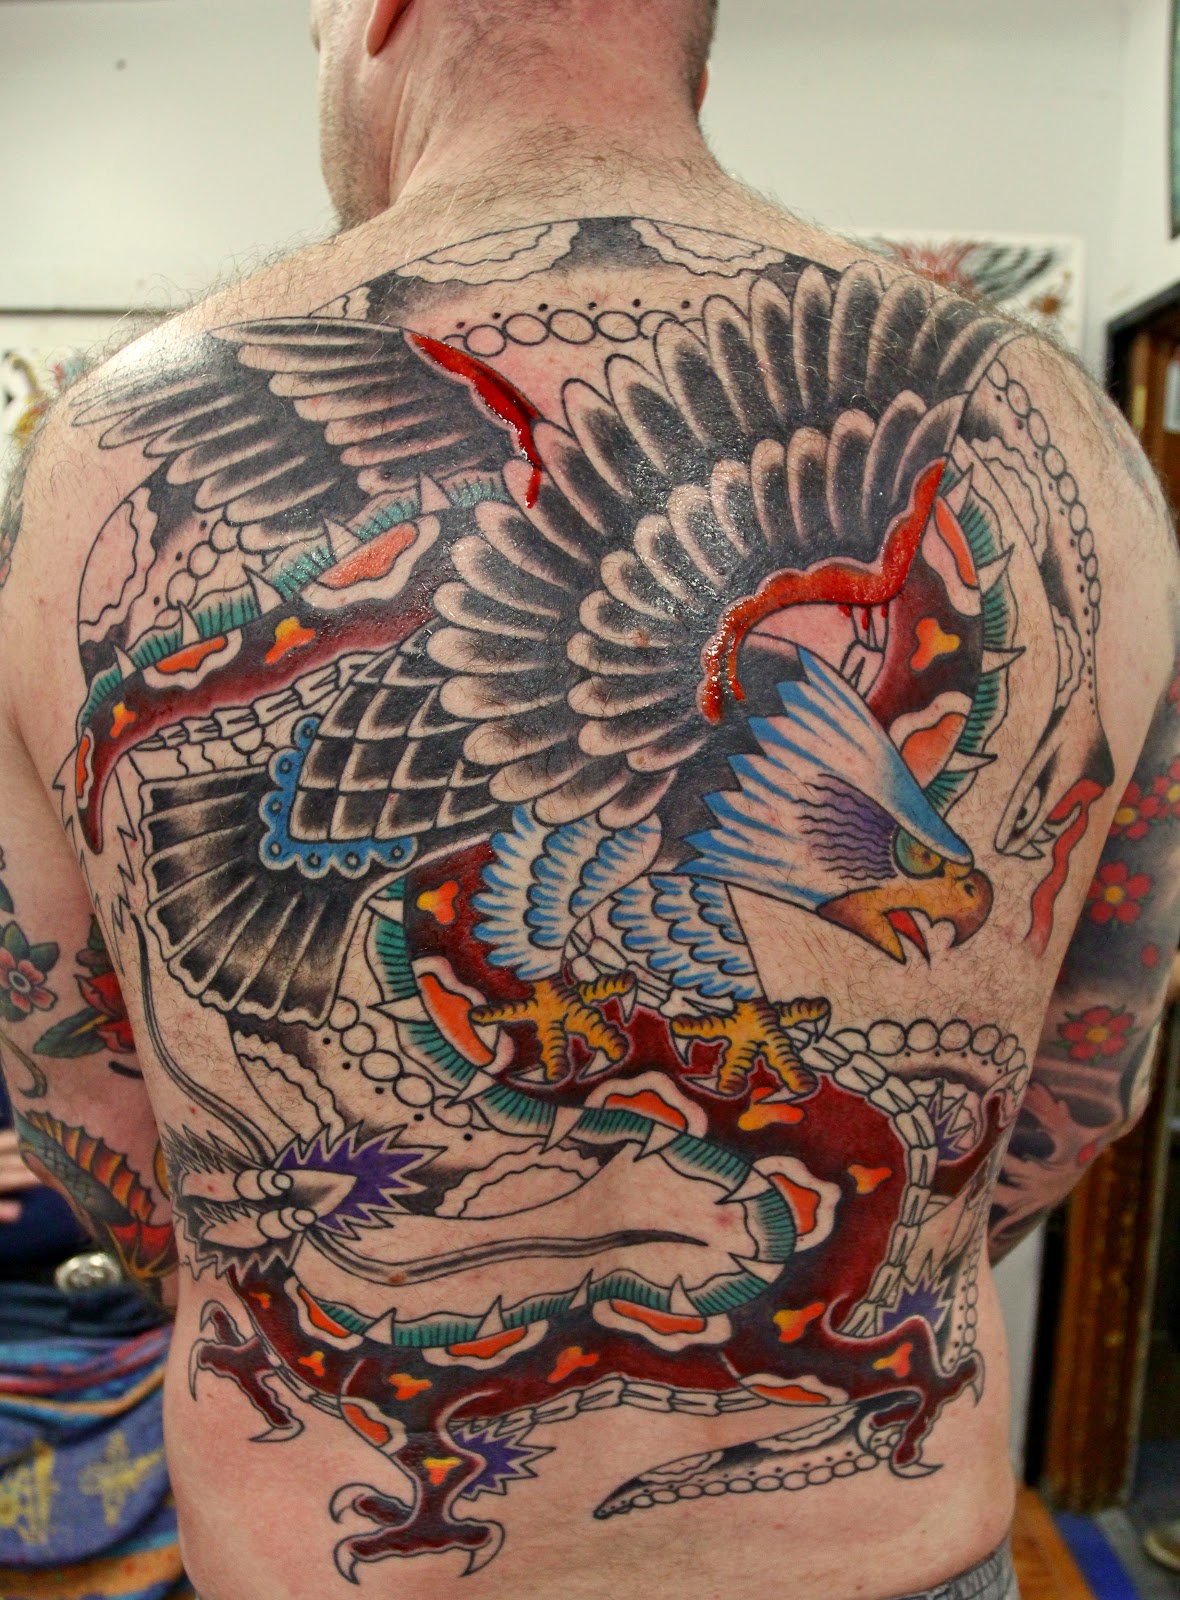 The Battle Royale Tattoo by Bob Roberts: 2013-01-06